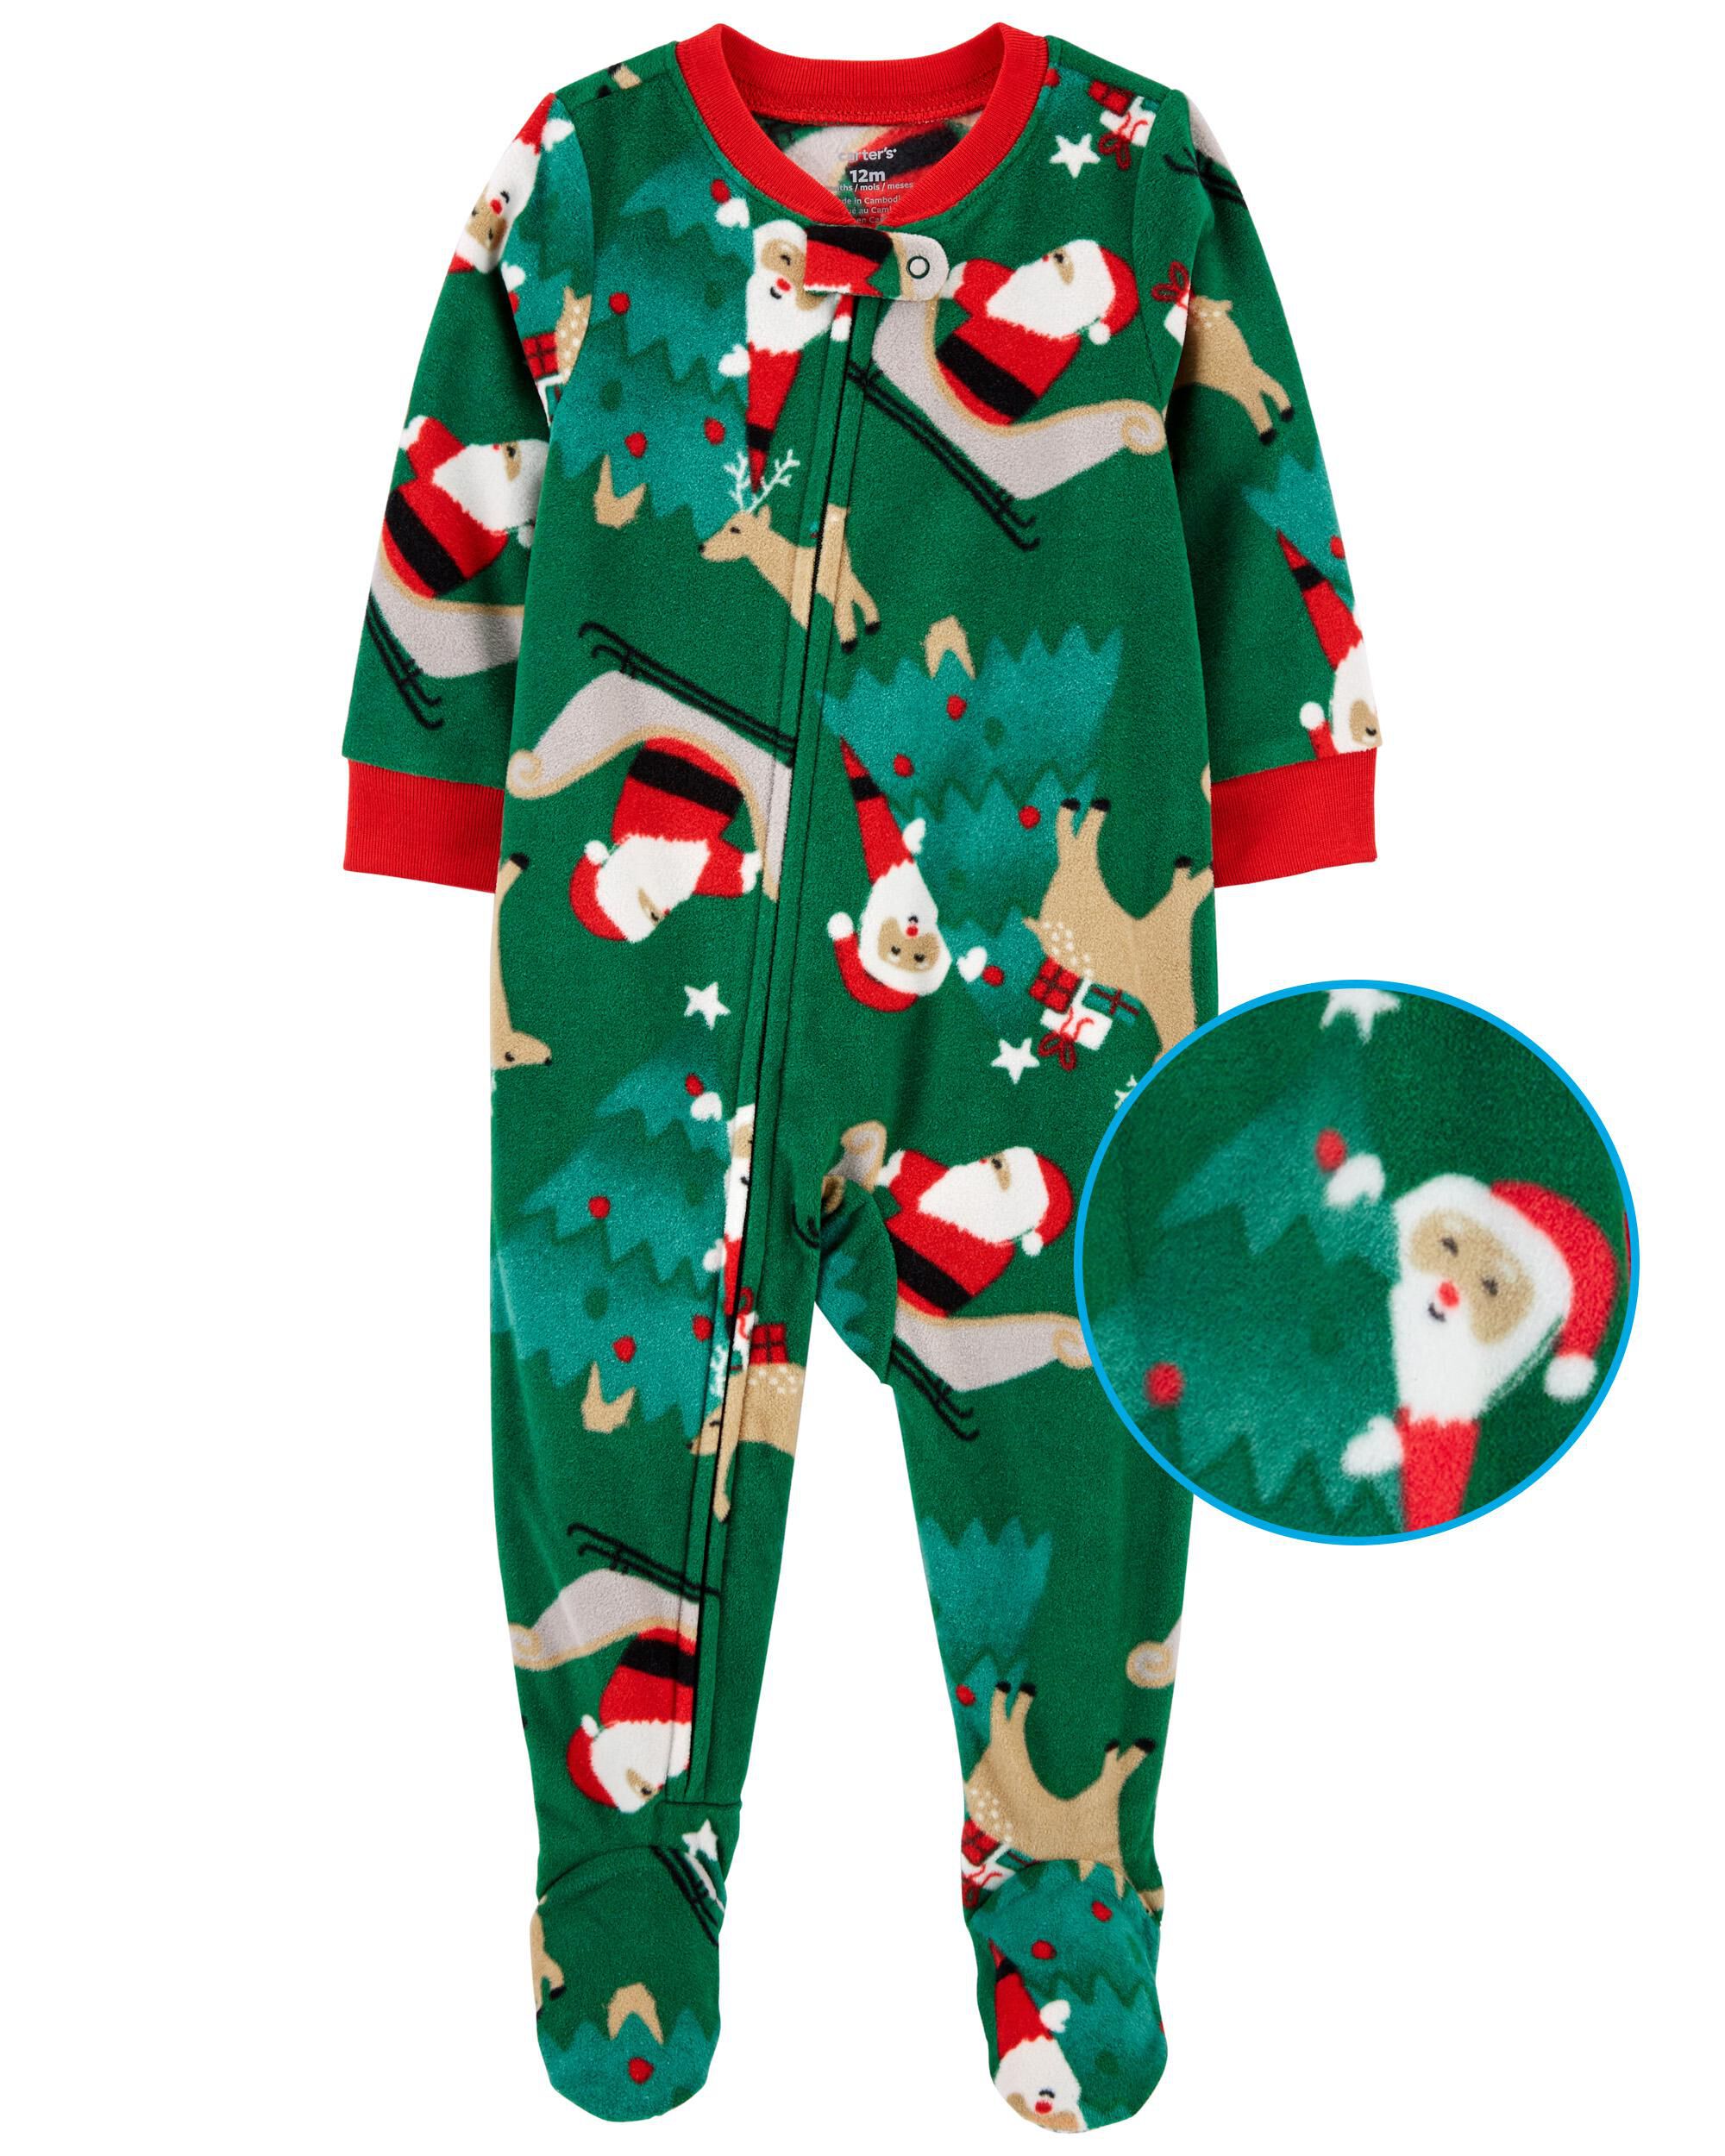 New Carter's Santa Suit 12m One Piece Holiday Christmas 